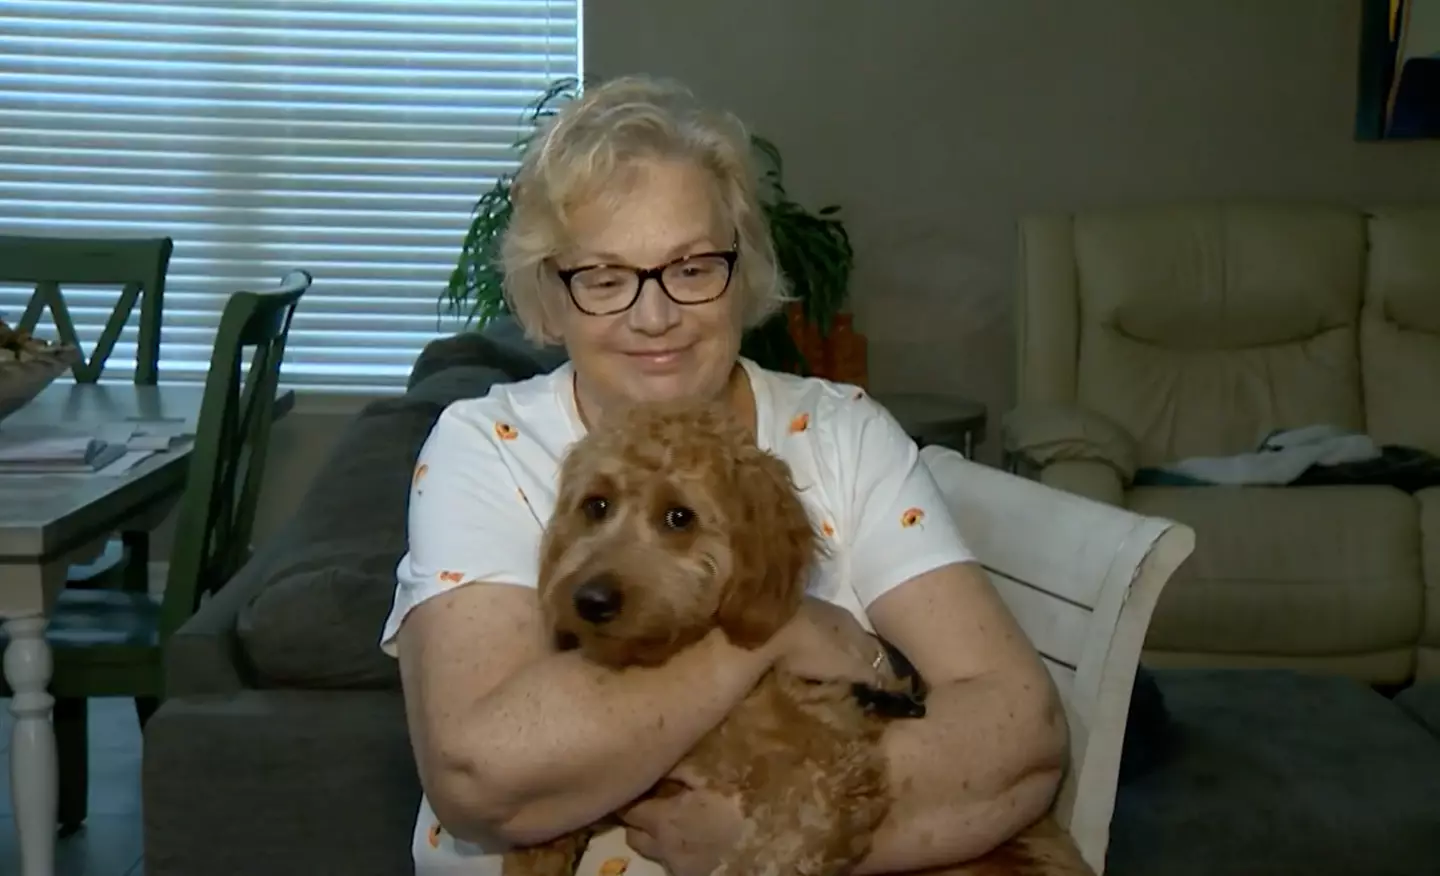 Gina Helsel and her dog had the shock of a life.